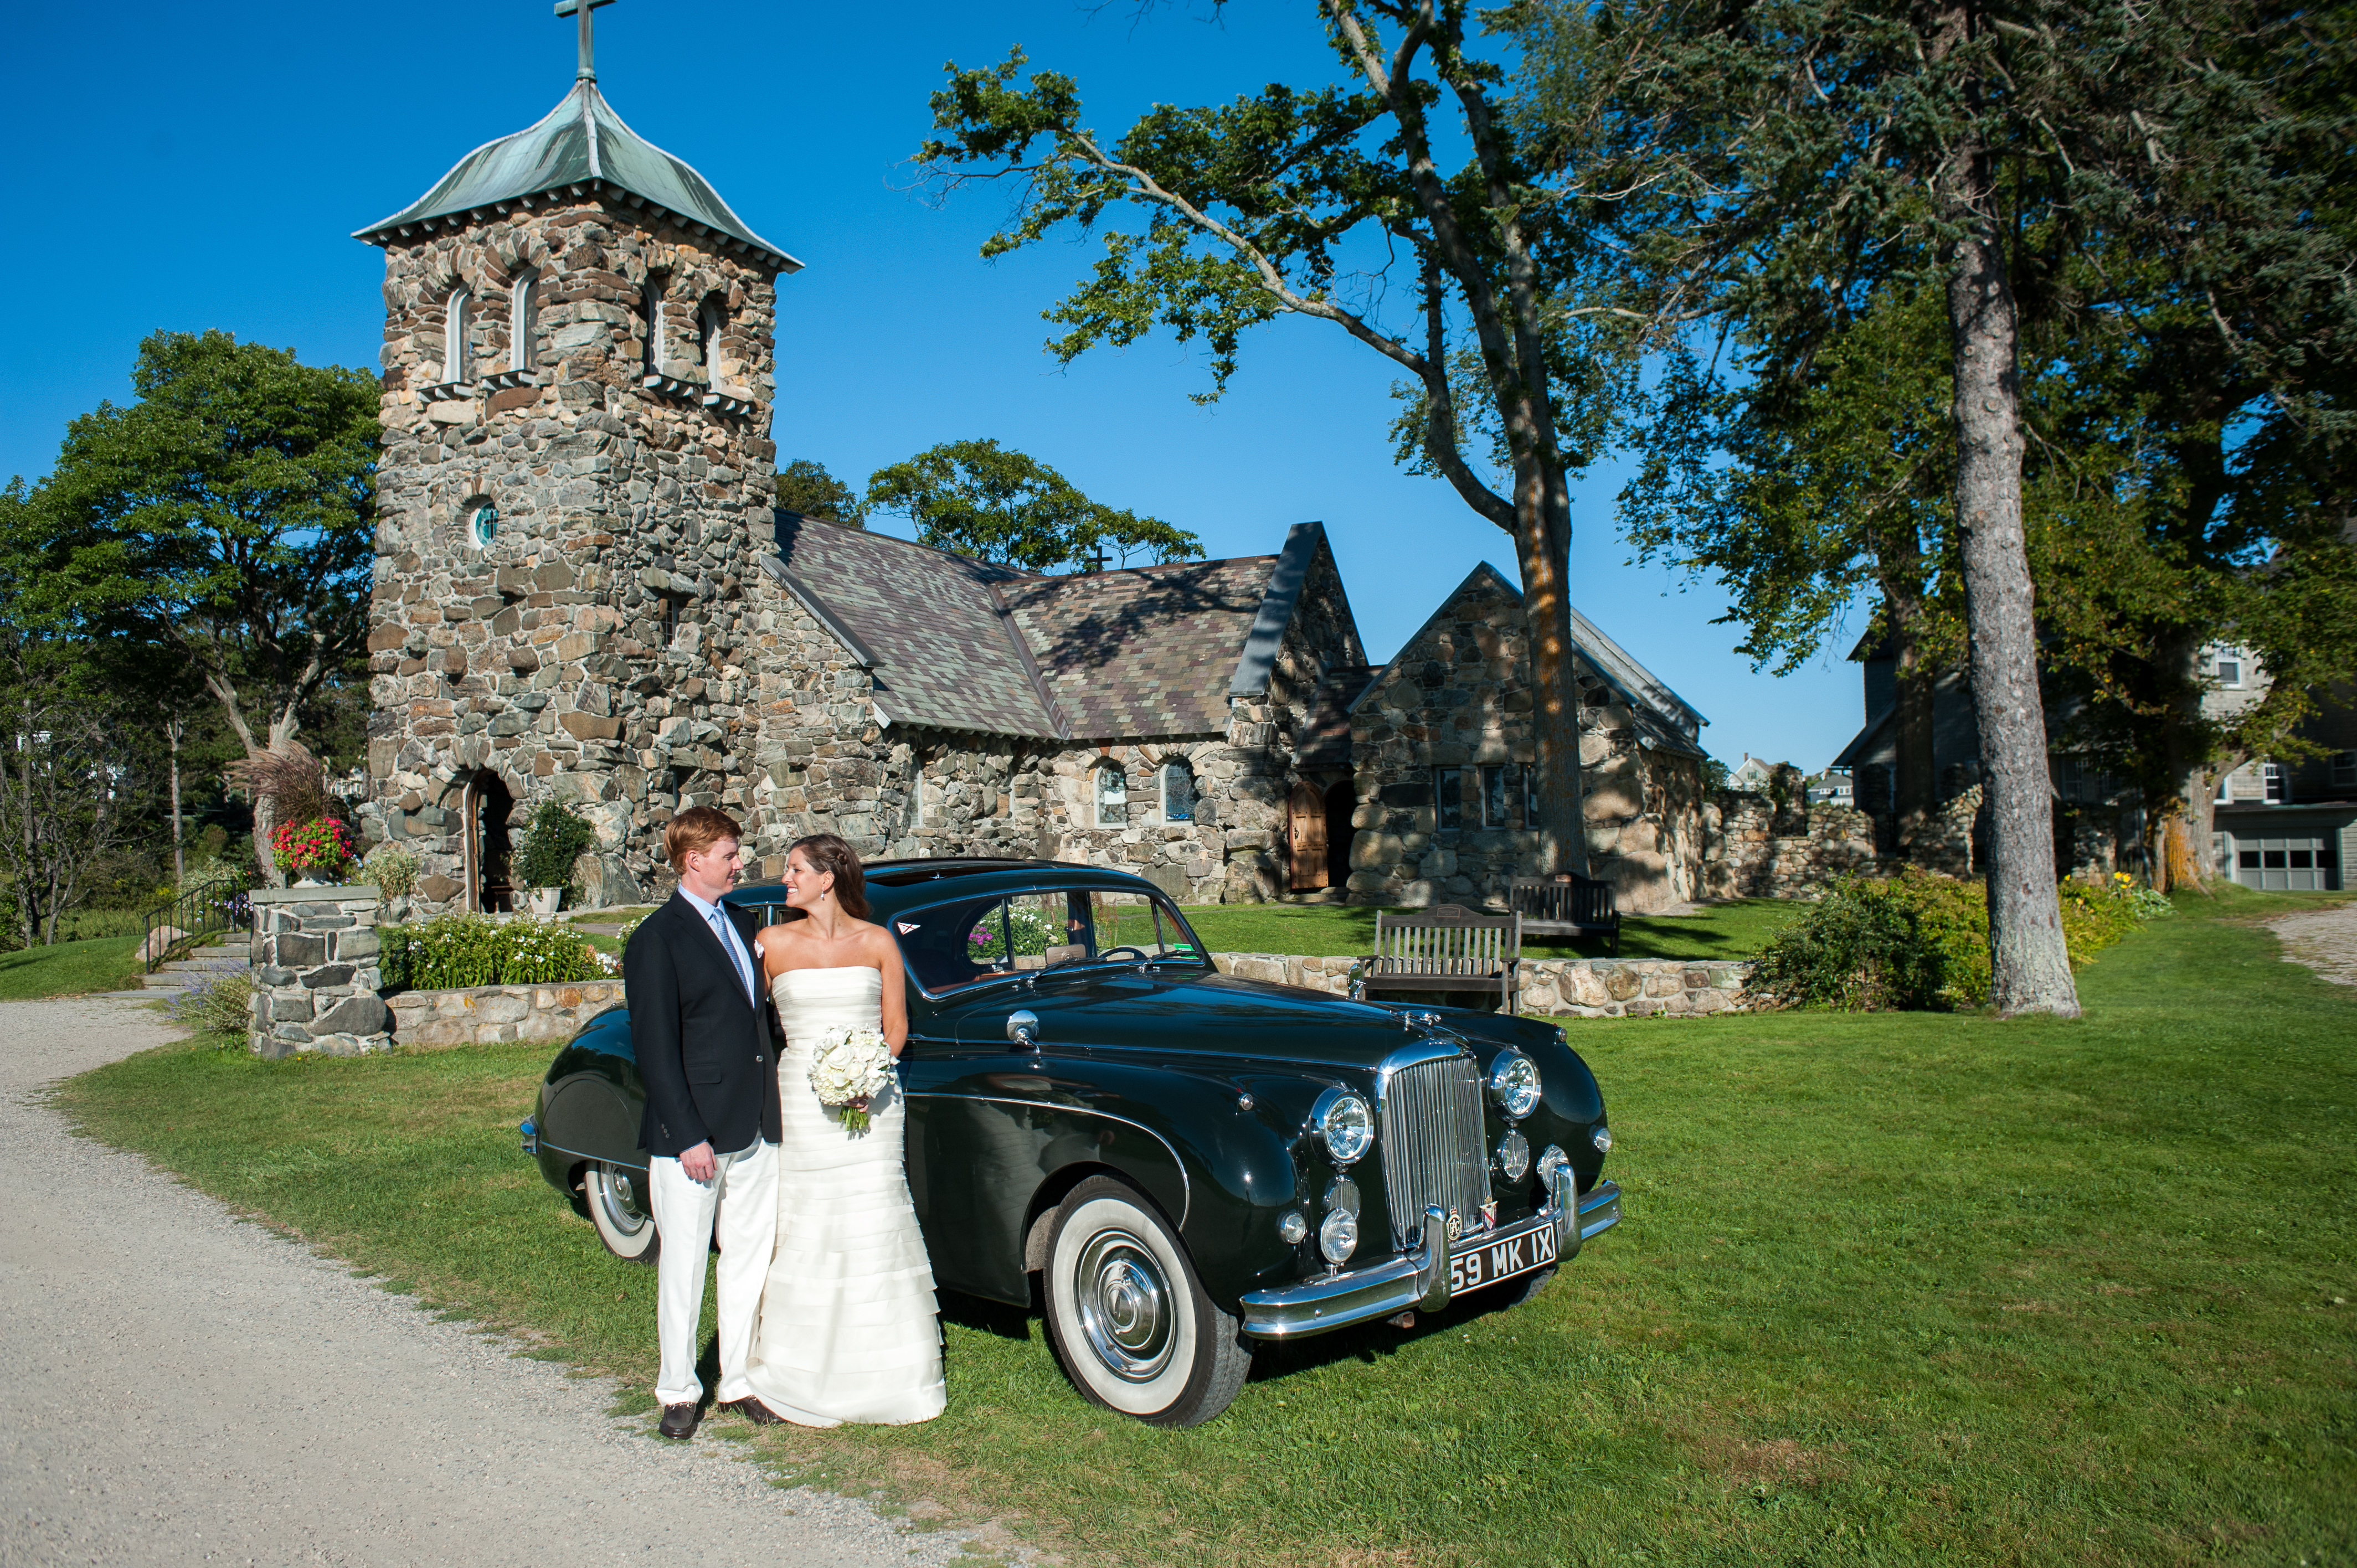 Seaside Chic at Kennebunk River Club | Photo: CA Smith | See more at www.localhost/beautifuldays